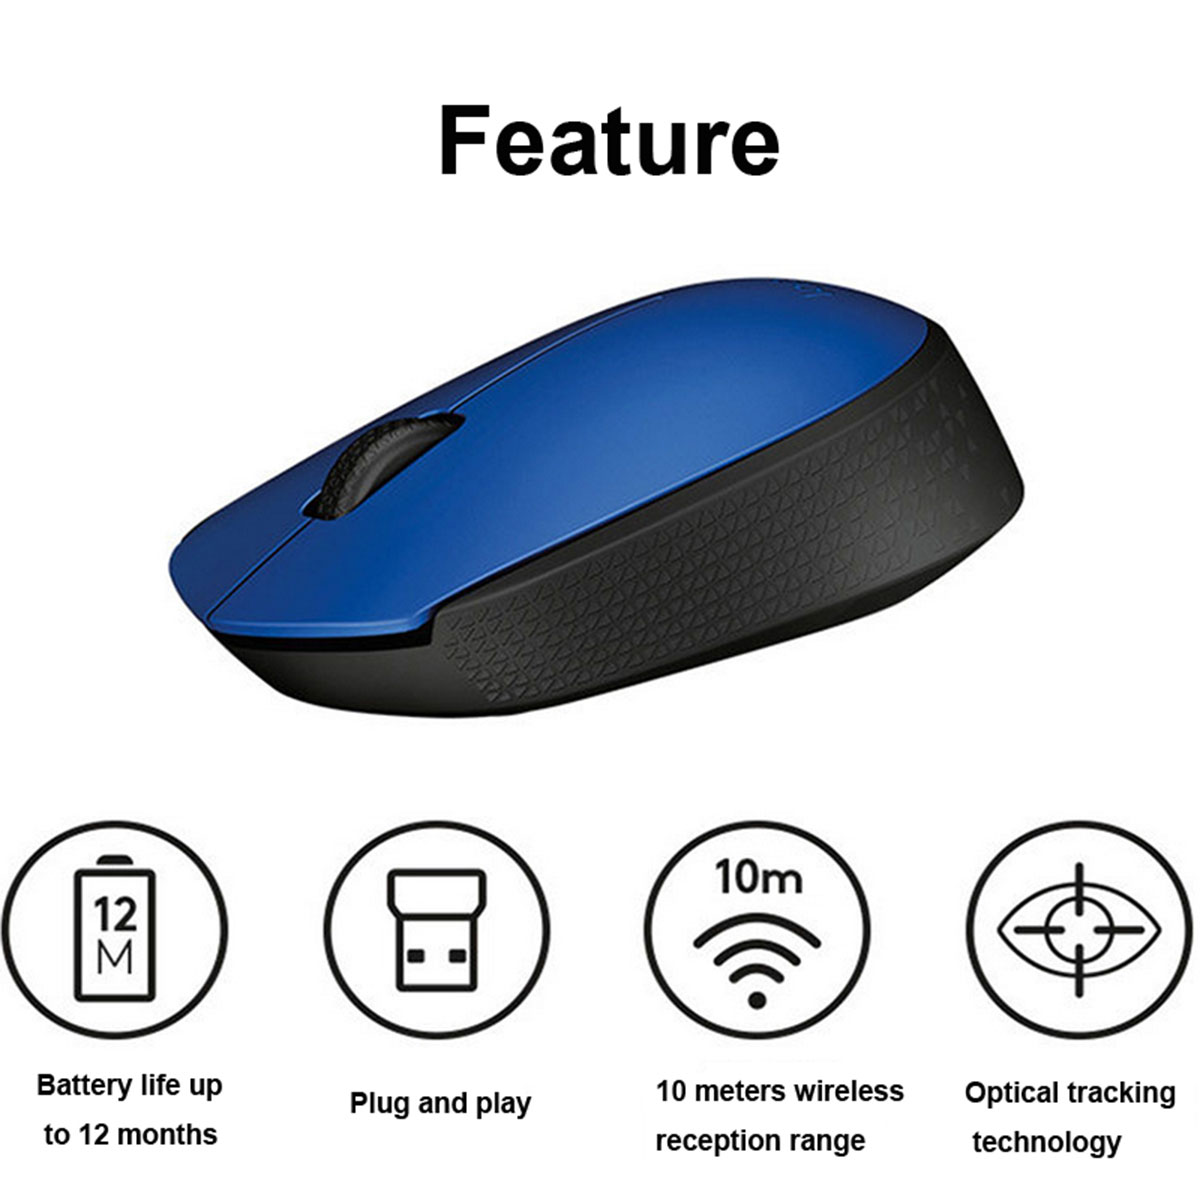 Computer & Networking :: Computer Accessories :: Mouse :: Logitech M170 wireless USB optical mouse